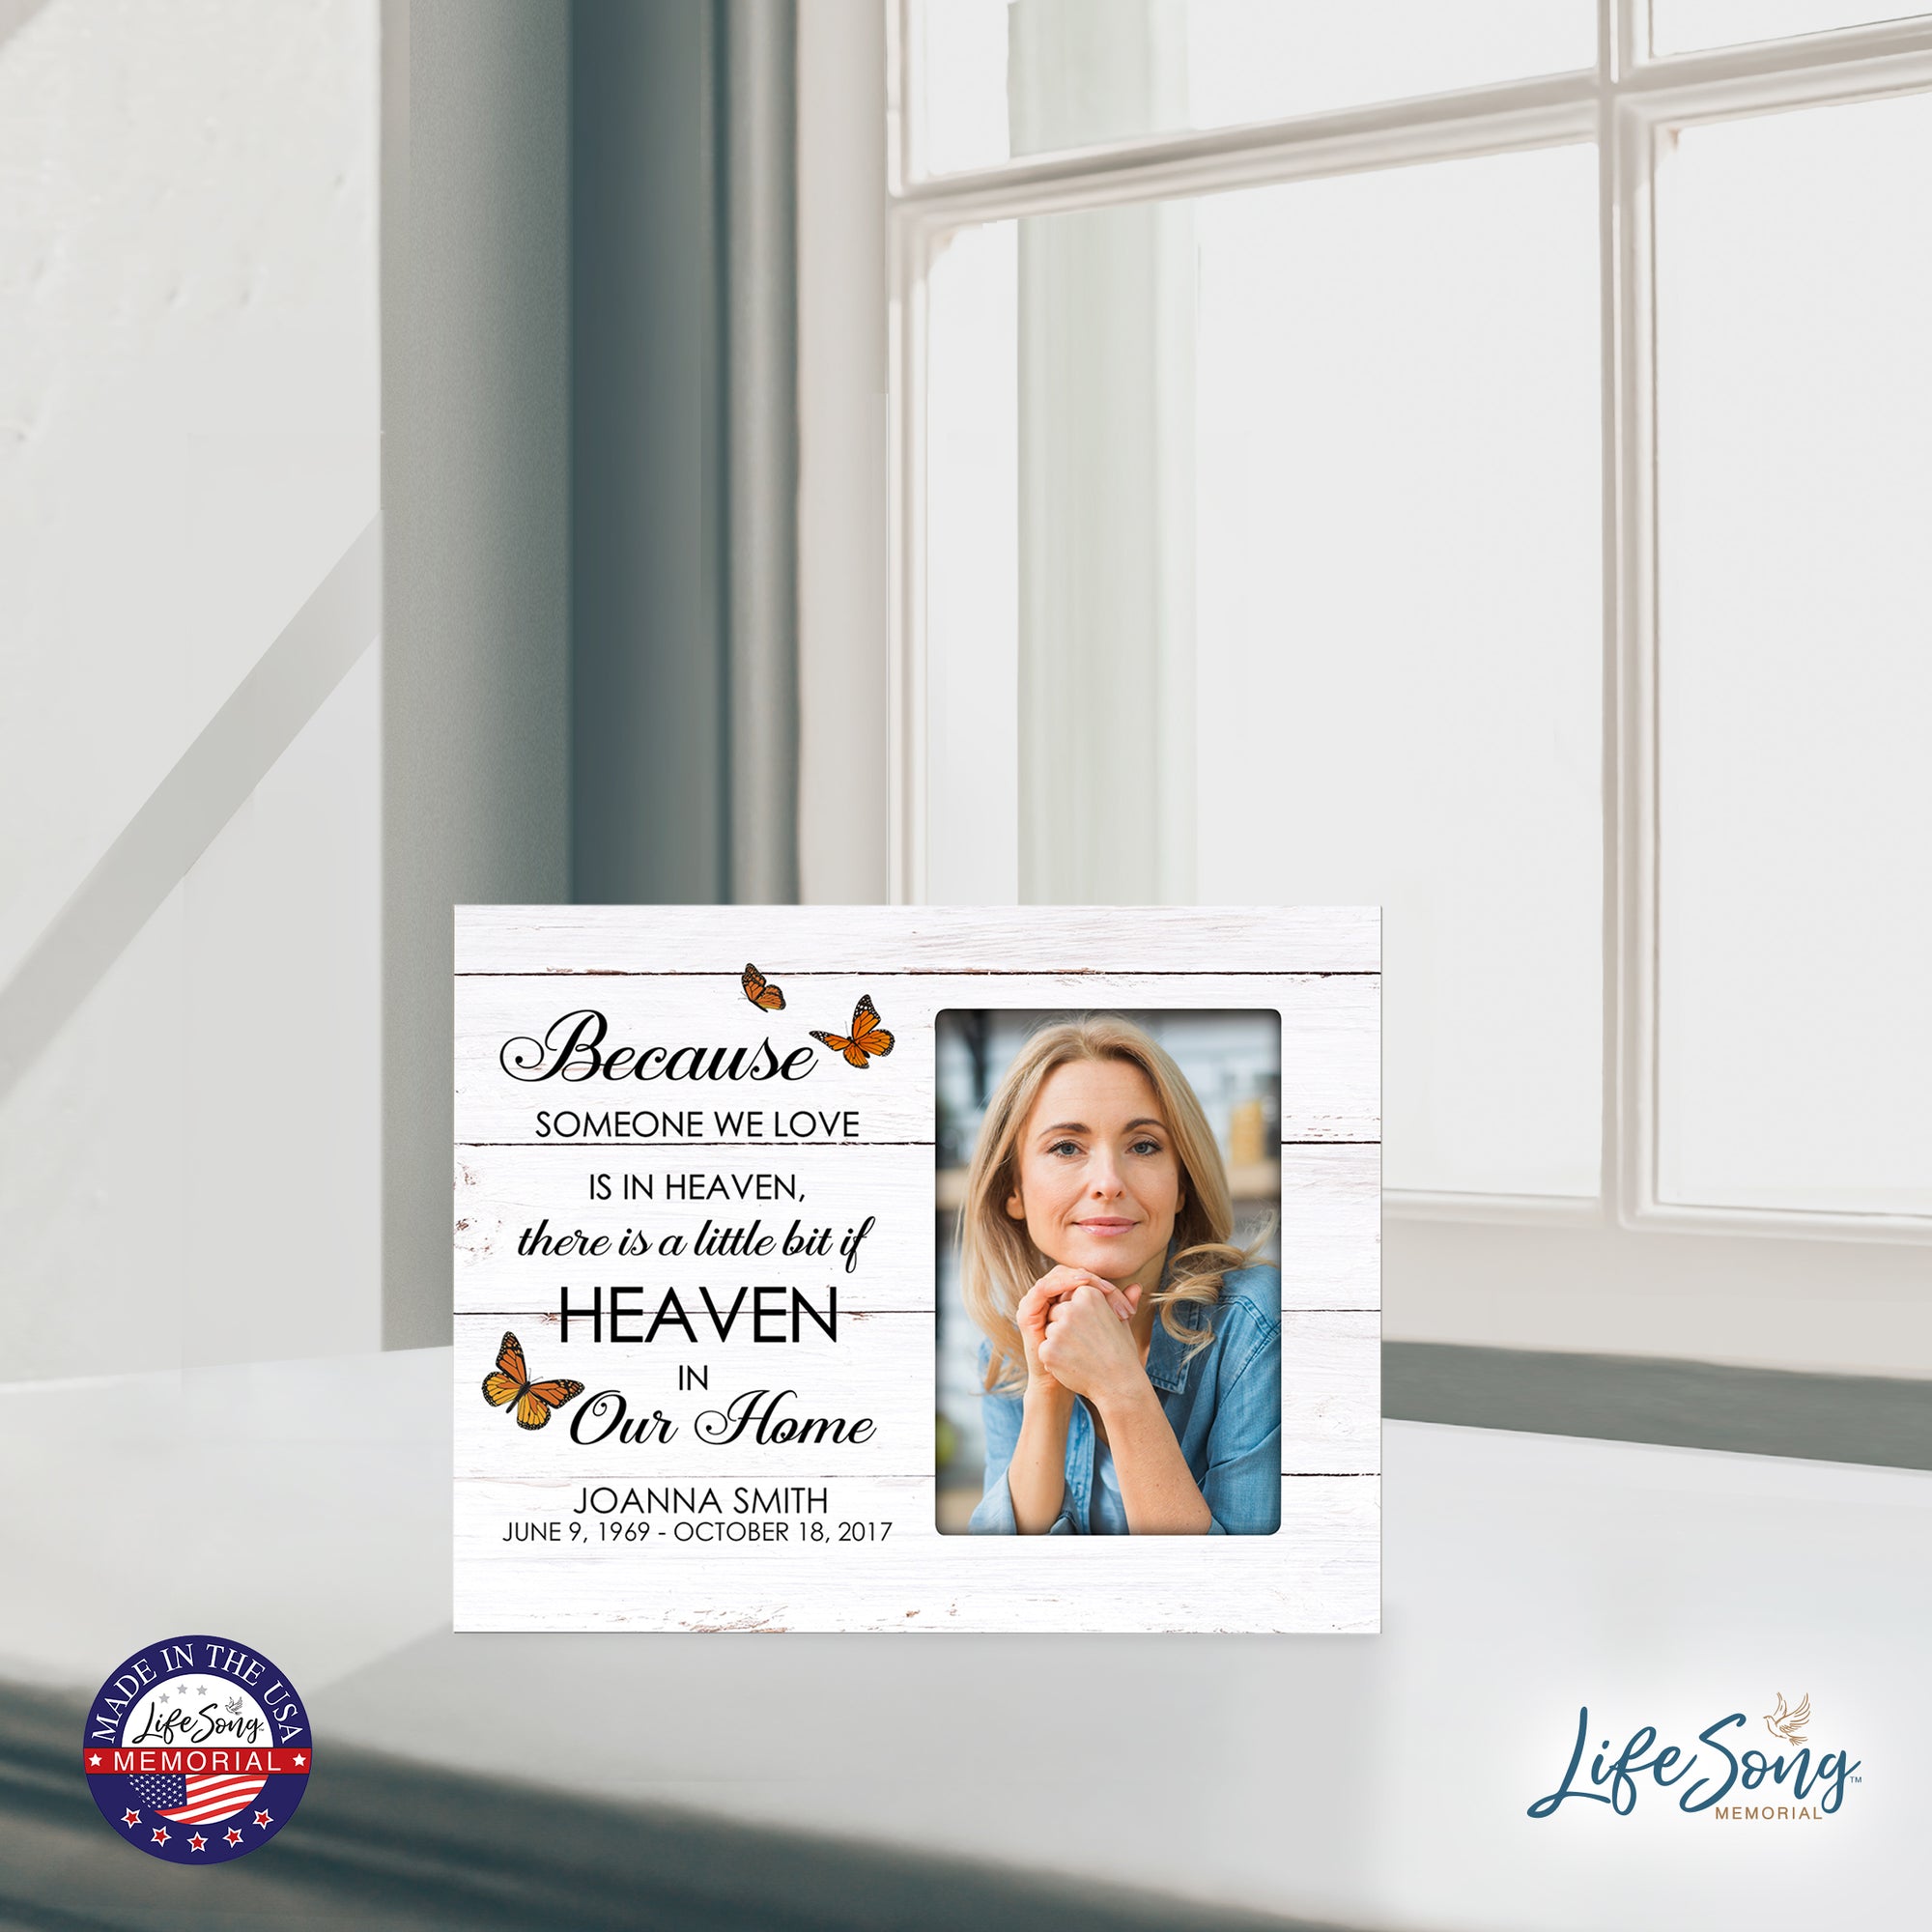 Personalized Horizontal 8x10 Wooden Memorial Picture Frame Holds 4x6 Photo - Because Someone We Love (White Distressed)